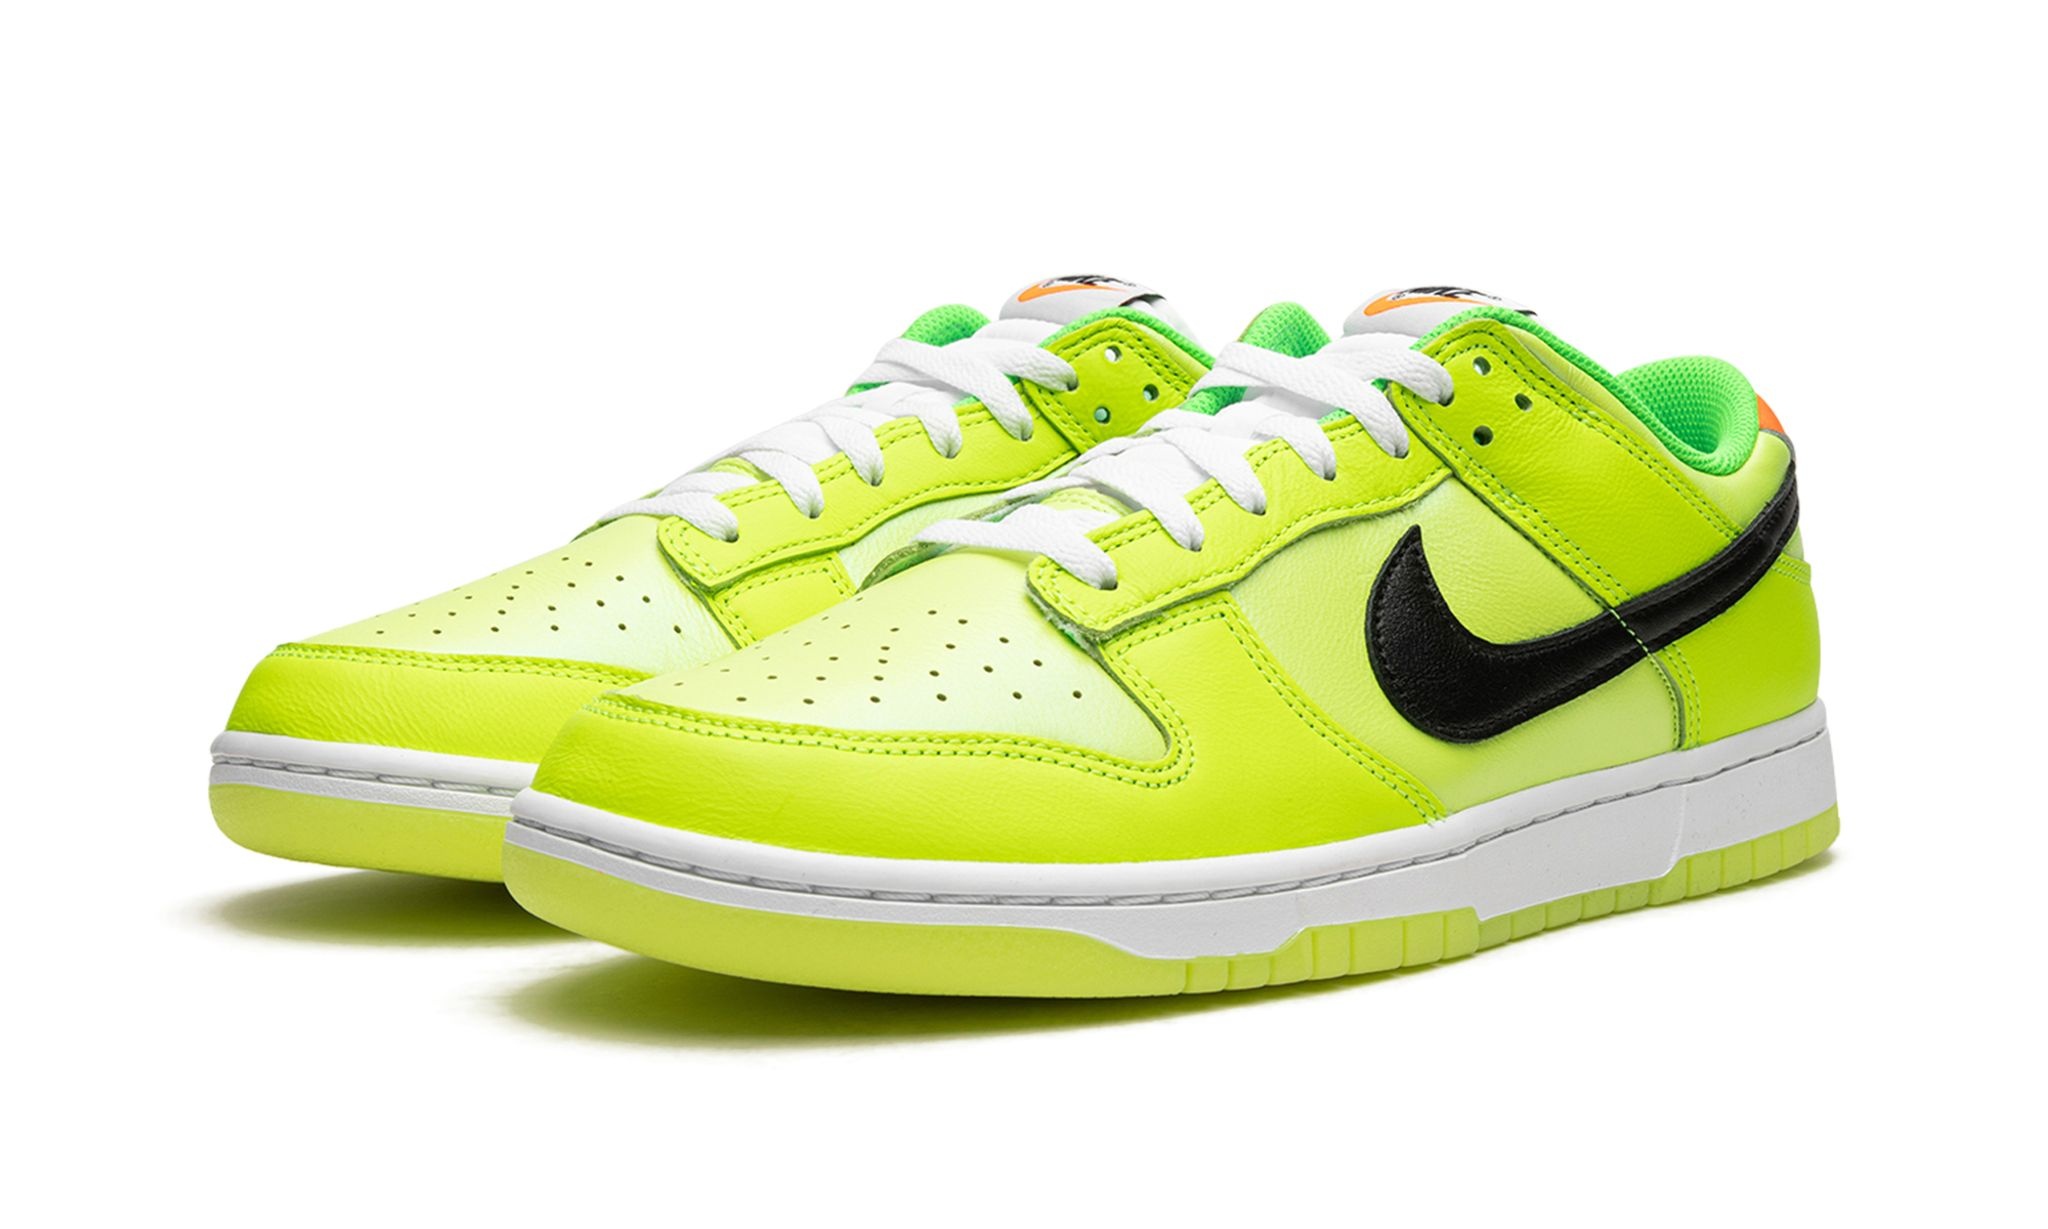 Dunk Low "Glow in the Dark" - 2